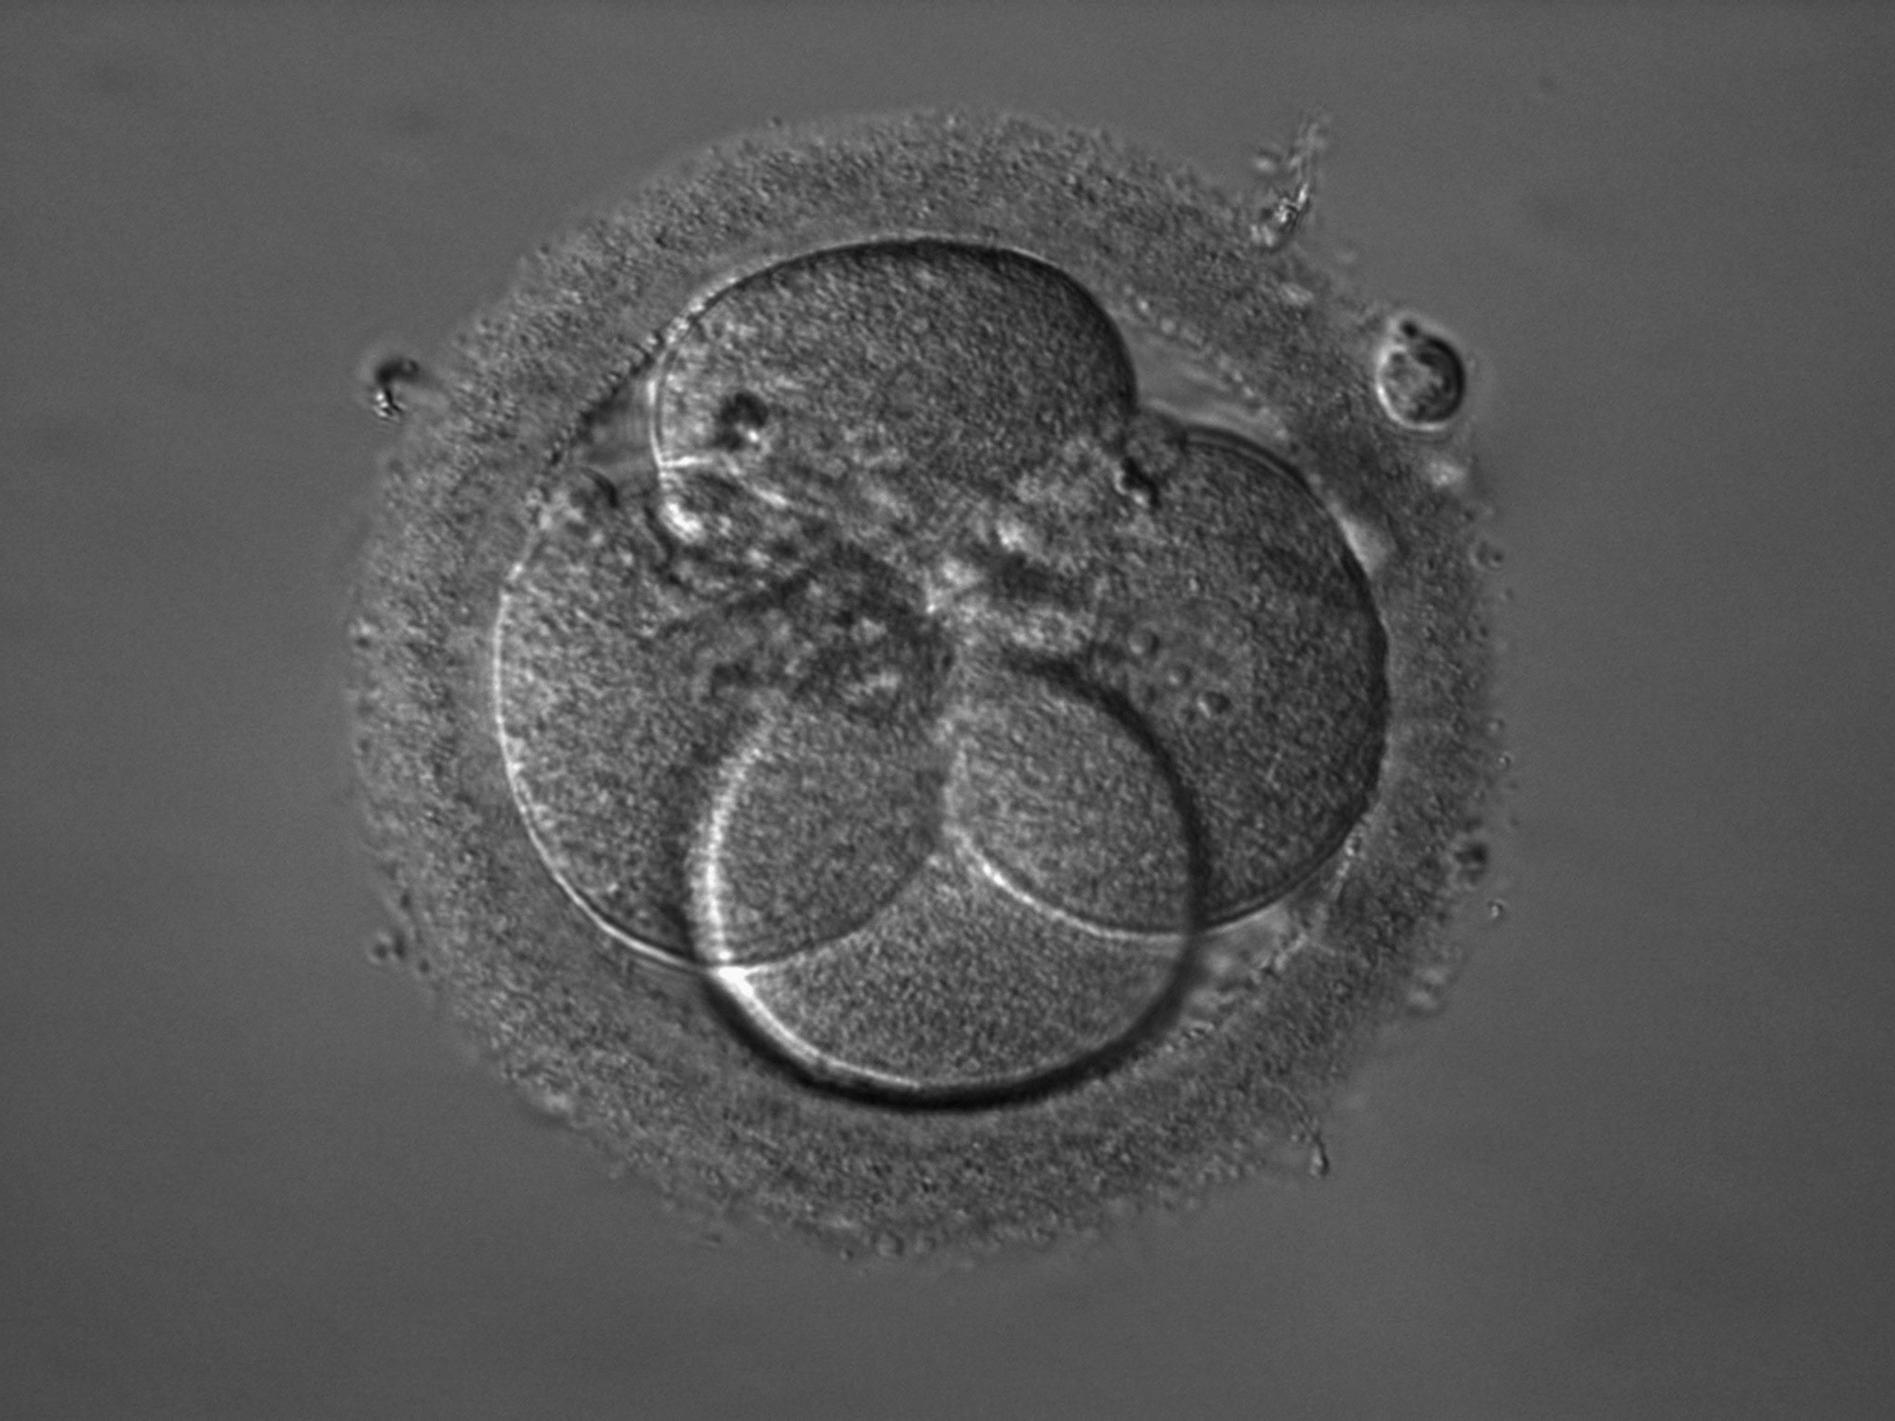 Embryo: Nucleus with nucleoli visible in right cell iHMC